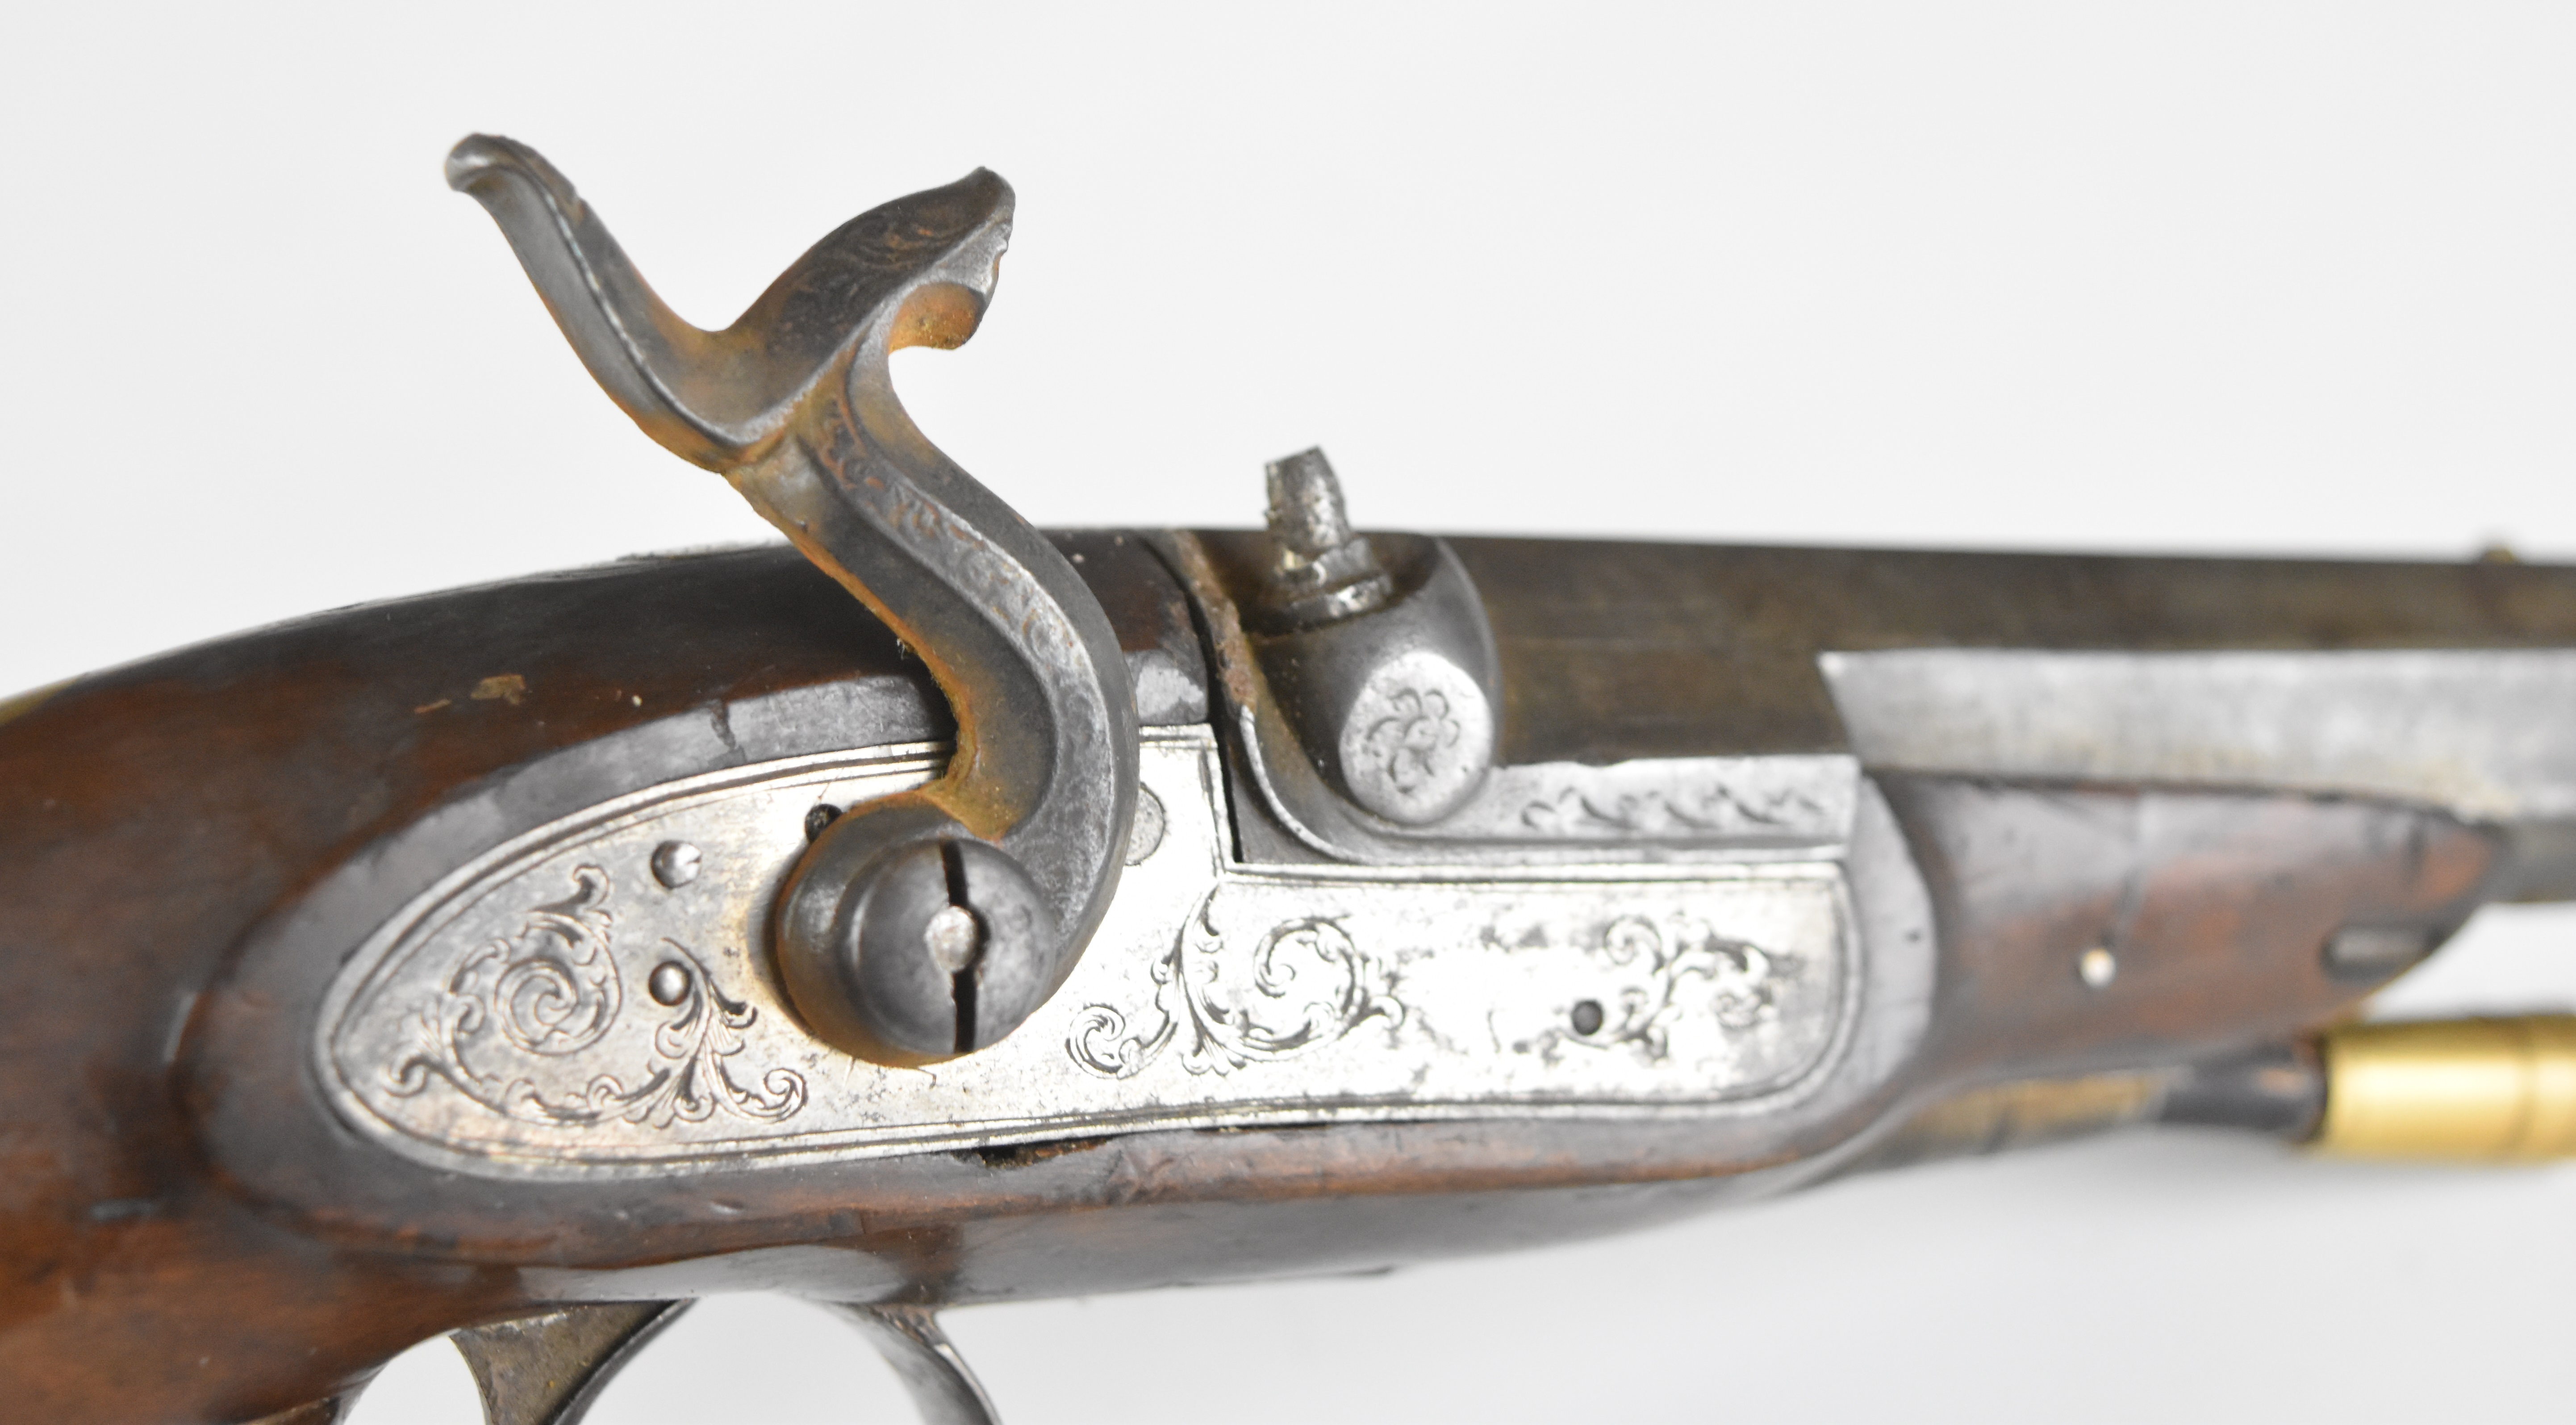 Bentley of London 36 bore percussion hammer action coat pistol with engraved lock, hammer, trigger - Image 9 of 10